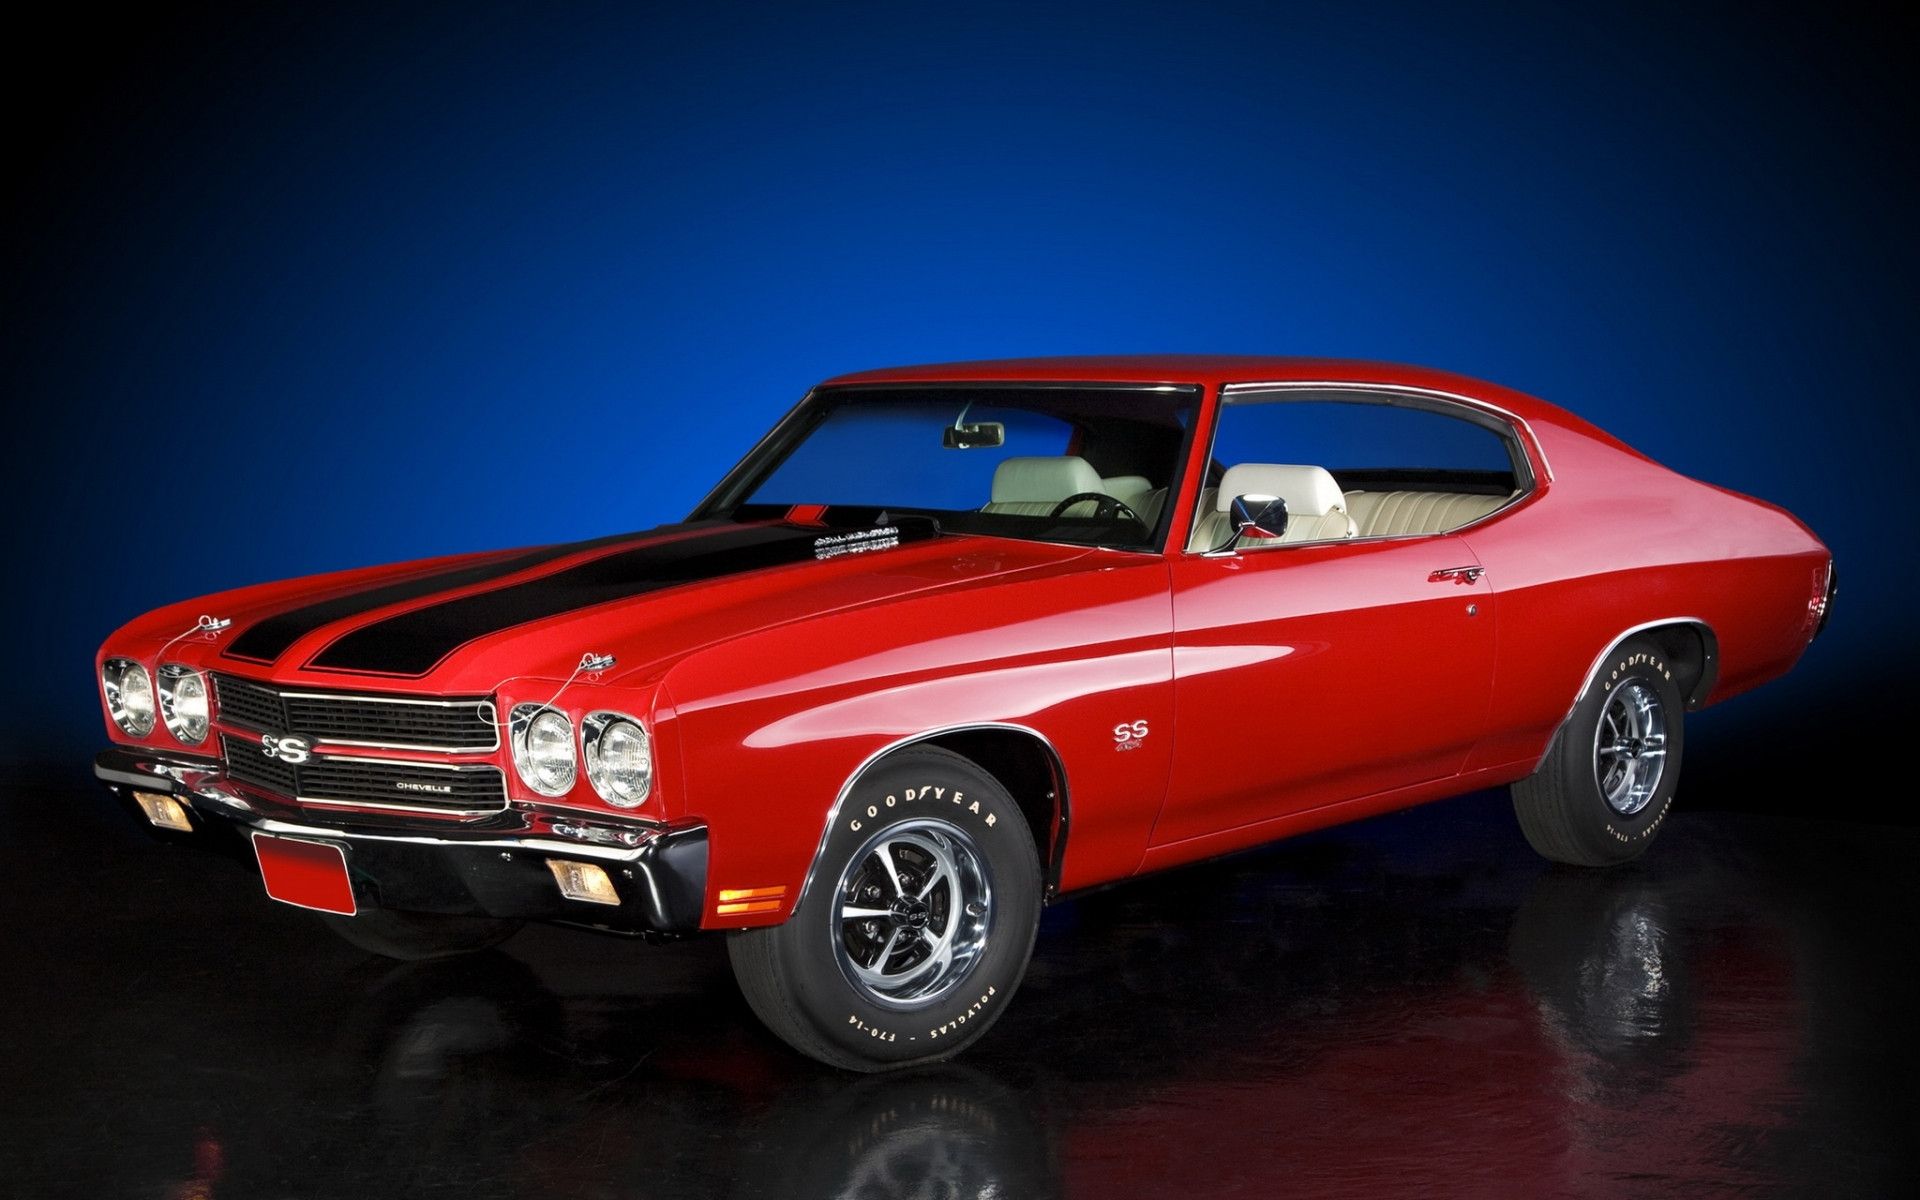 Chevelle SS Wallpapers 1920x1200 20009 KB